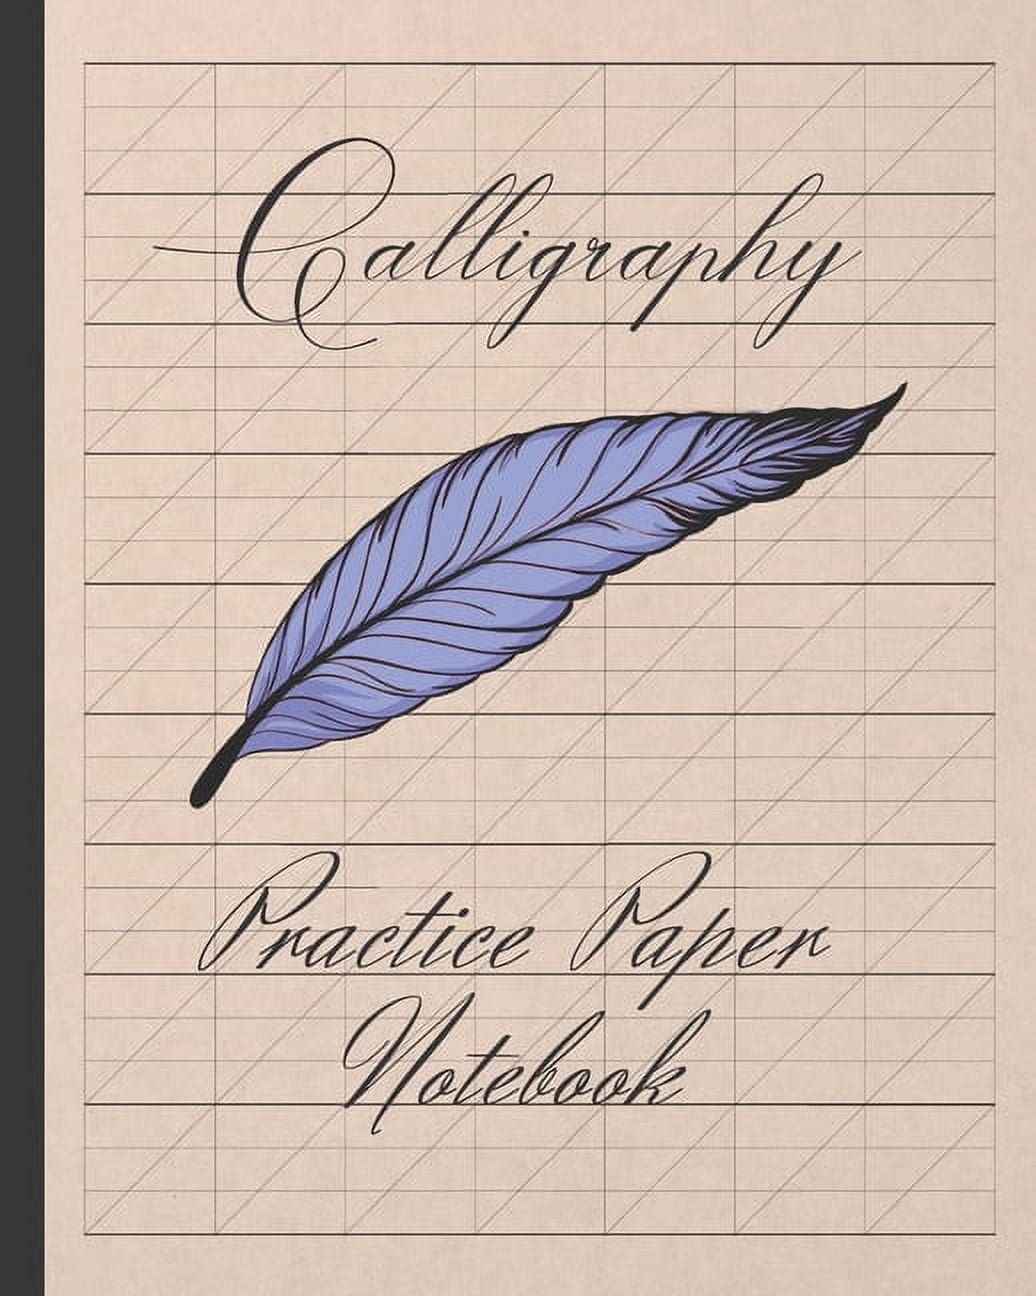 Calligraphy Notebook: Blank Lined Handwriting Practice Paper for Adults &  Kids 150 Pages of Calligraphy Writing Paper - Calligraphy workbook  practice, Calligraphy Notebook & journal - Calligraphy, Podzed; Journals &  Notebooks, Podzed: 9781799129233